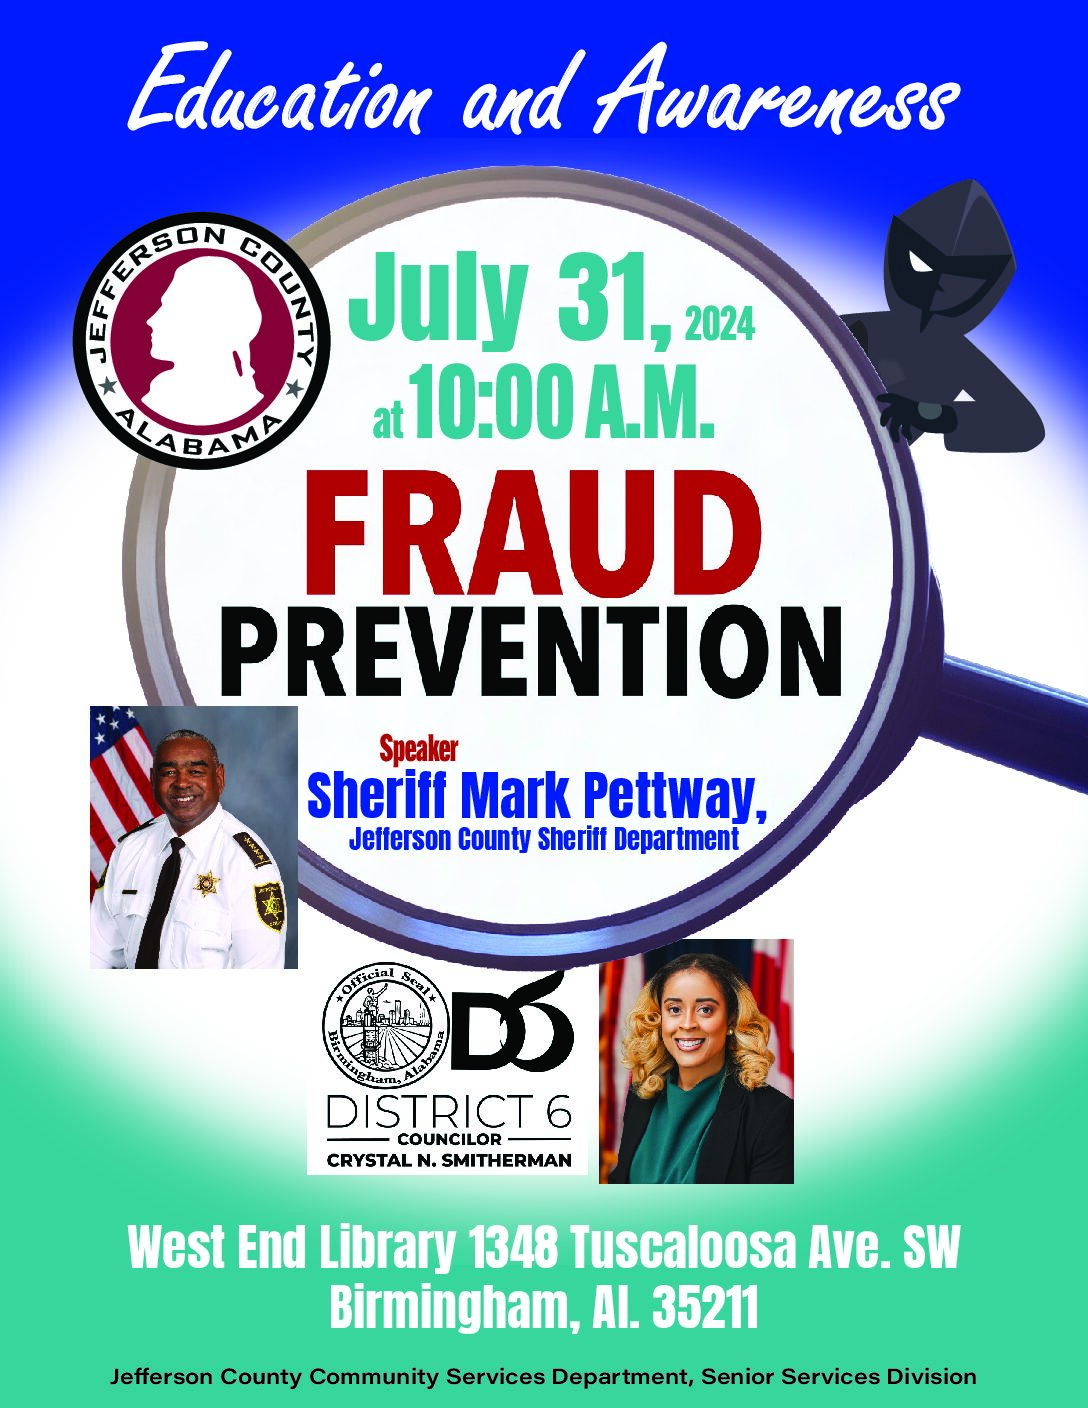 Fraud Prevention Education and Awareness